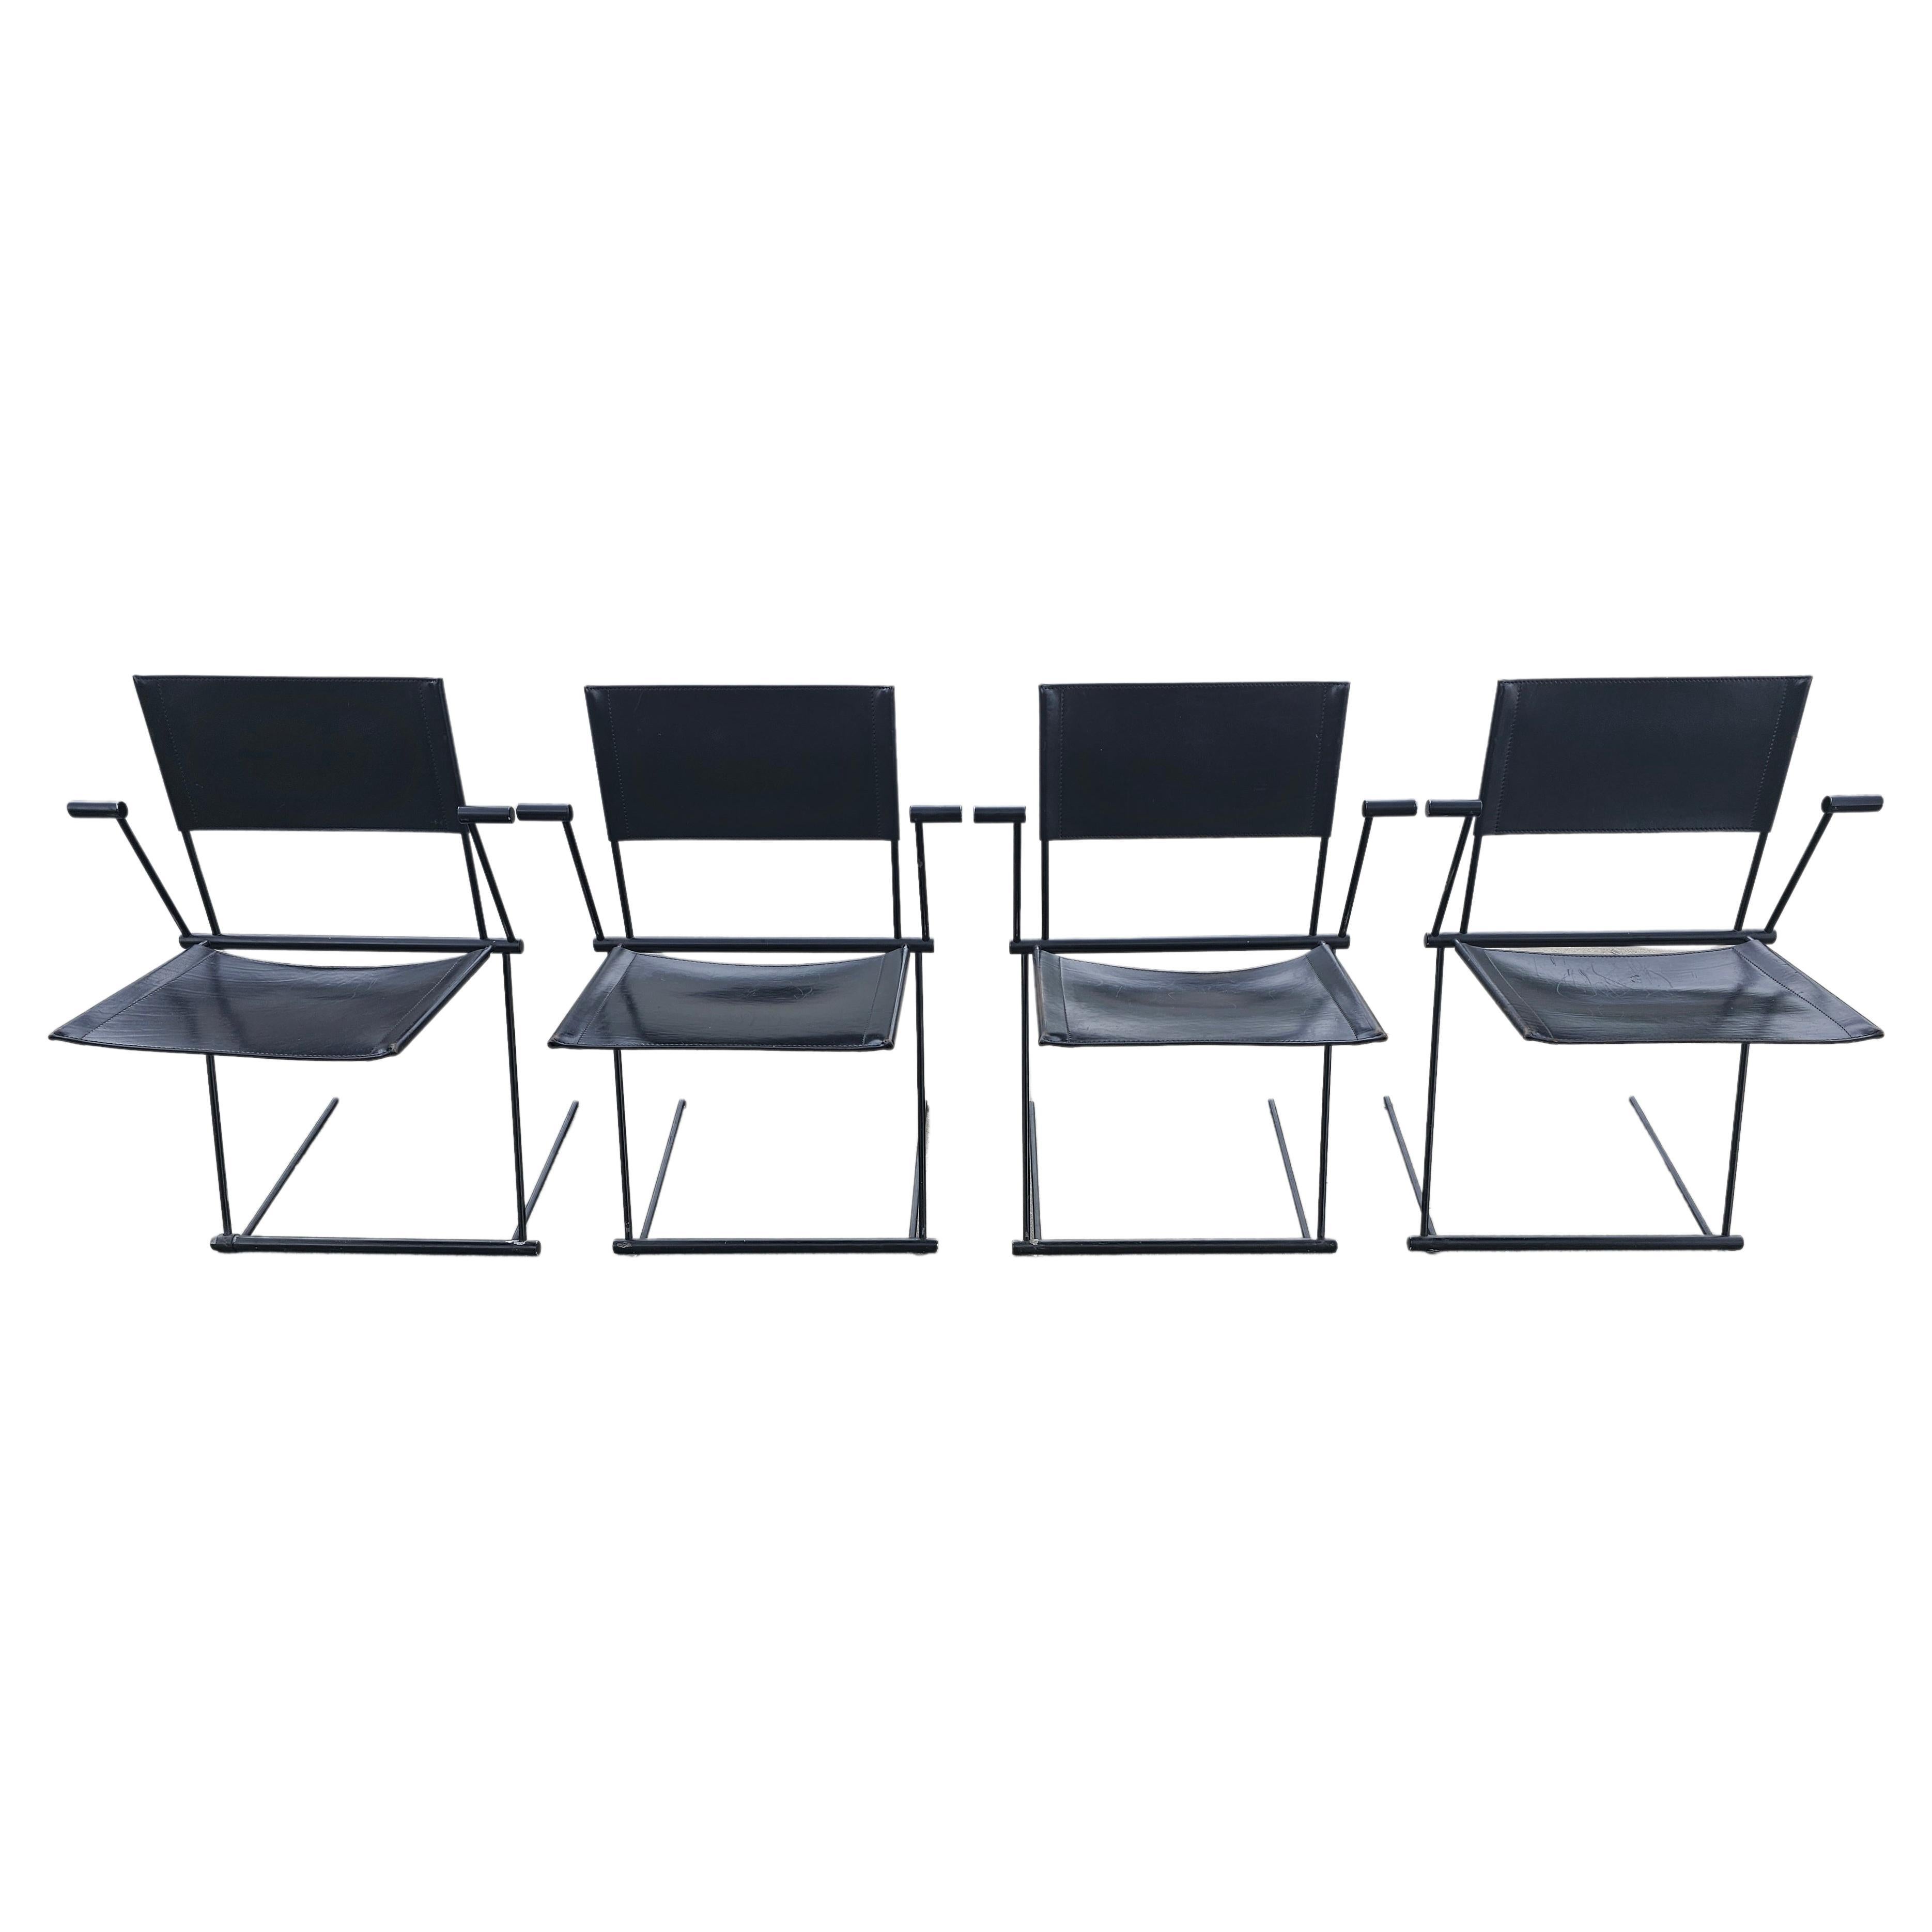 Set of 4 Ballerina Dining Chairs by Herbert Ohl for Matteo Grassi, Italy 1990s